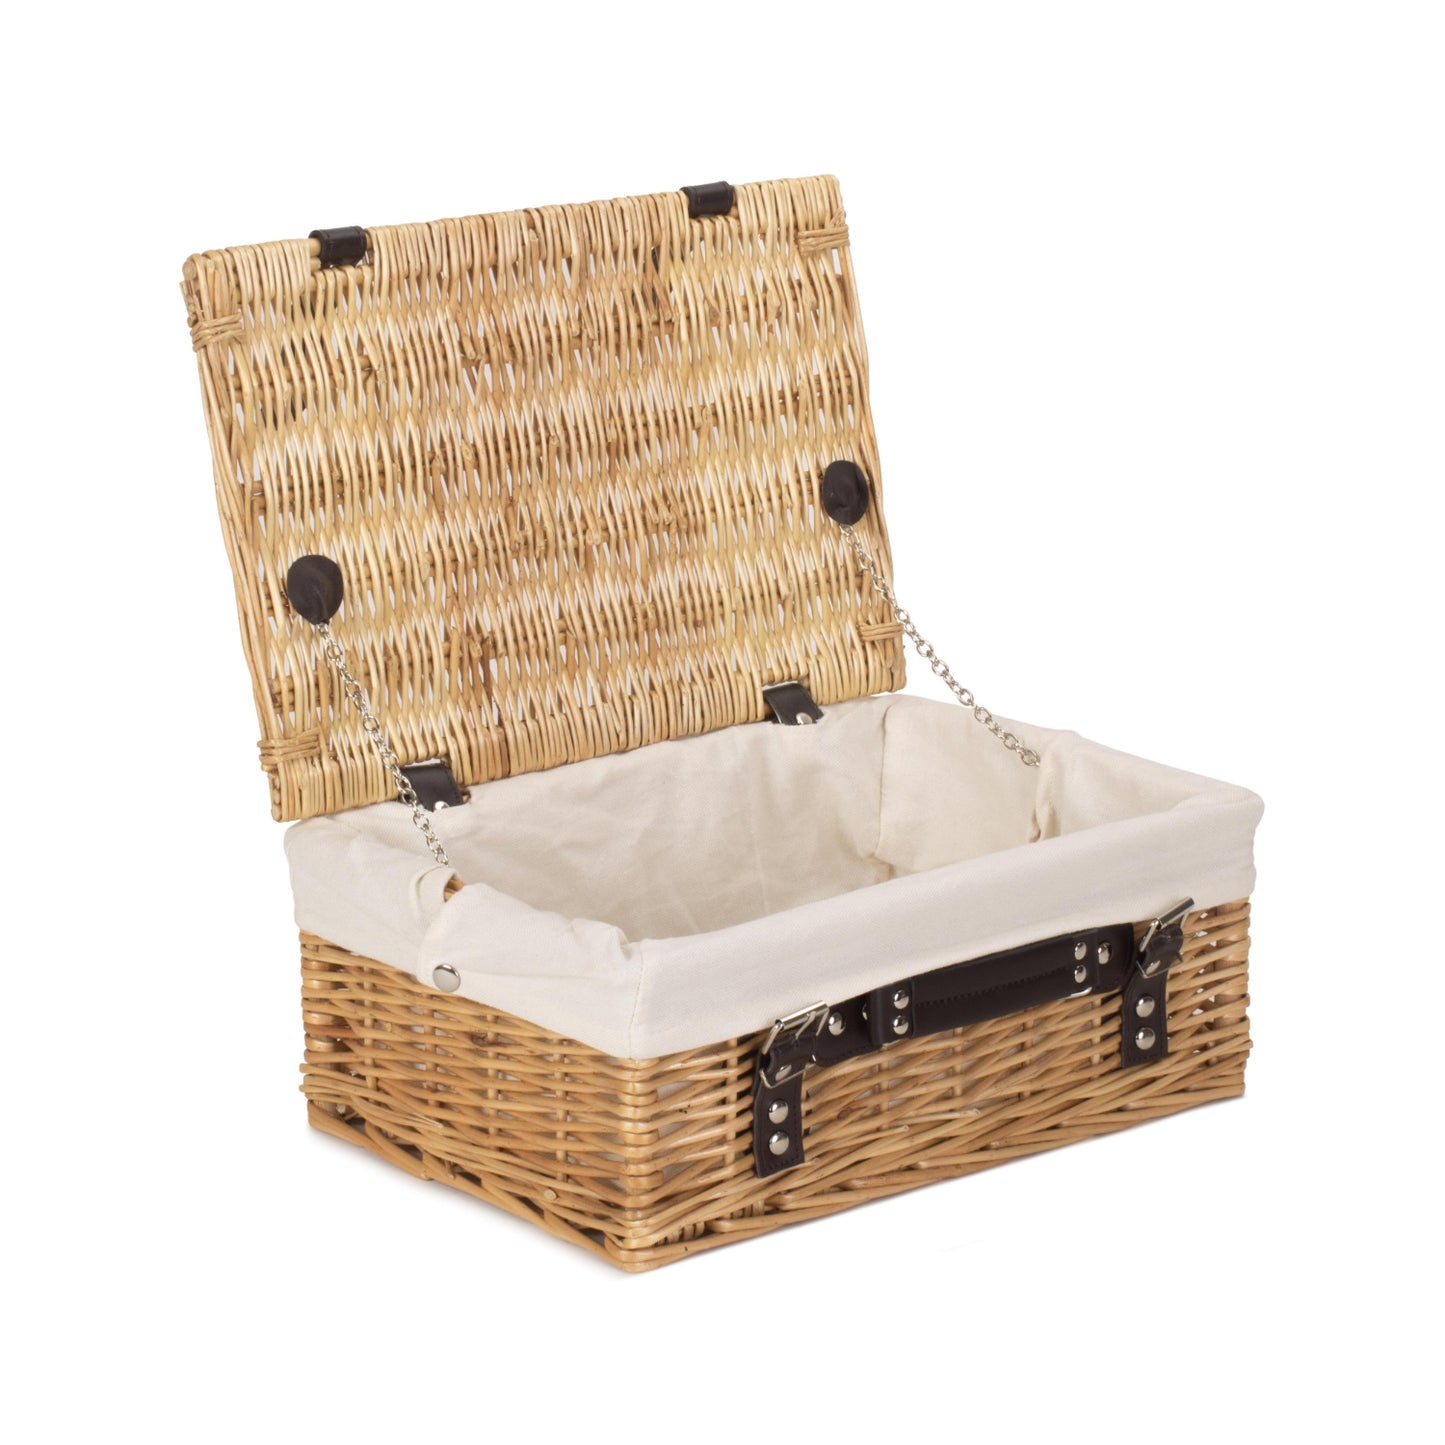 14 Inch Wicker Hamper With White Lining